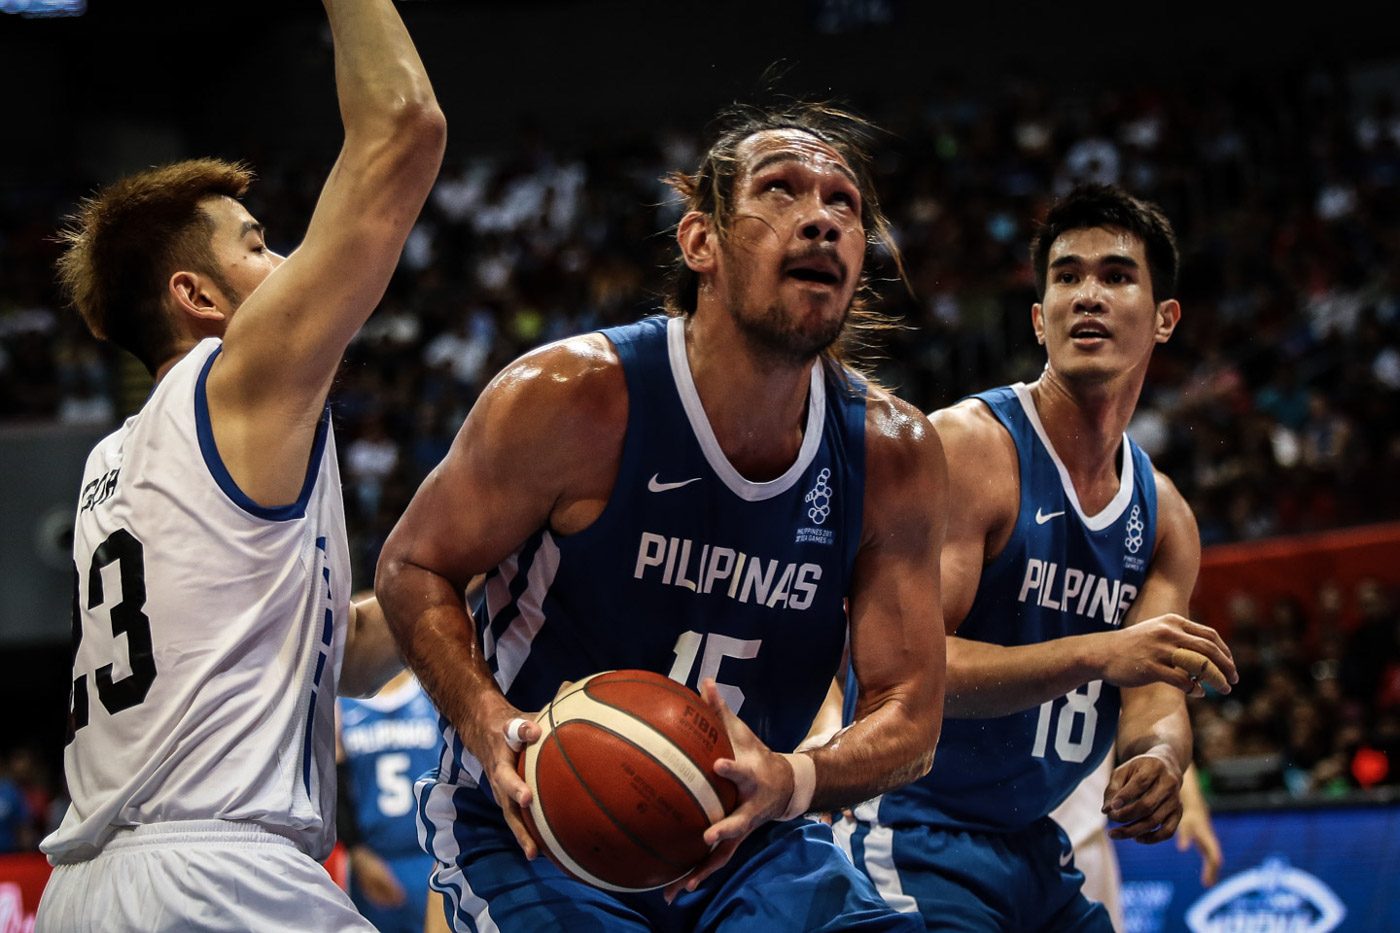 Pringle waxes hot early as Gilas thwarts Singapore in 52-point romp